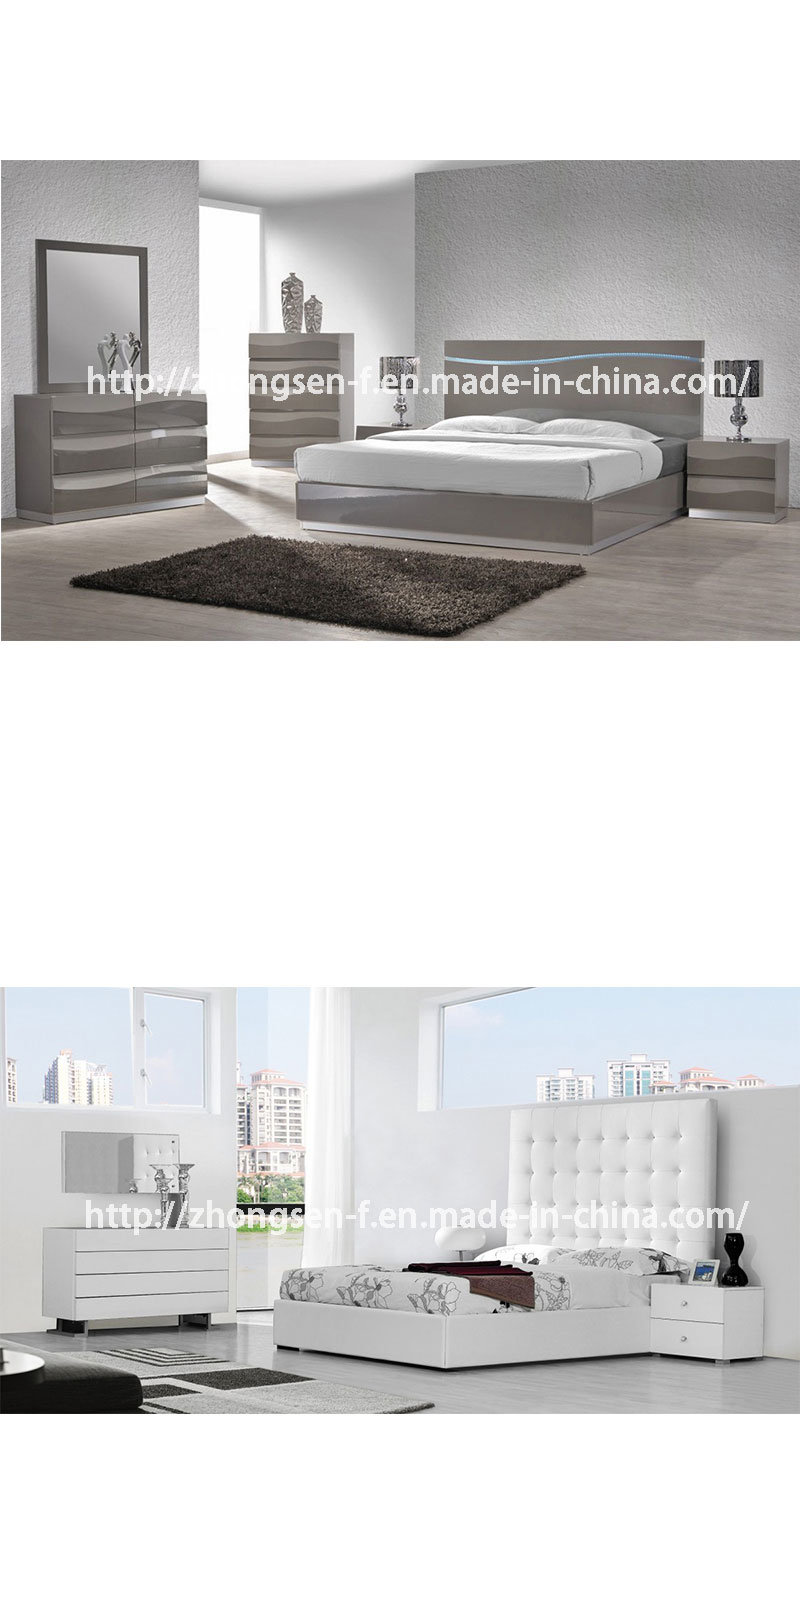 Customization Contemporary Italian Style King Bedroom Furniture in White and Sliver High Gloss Lacquer with Oak Wood